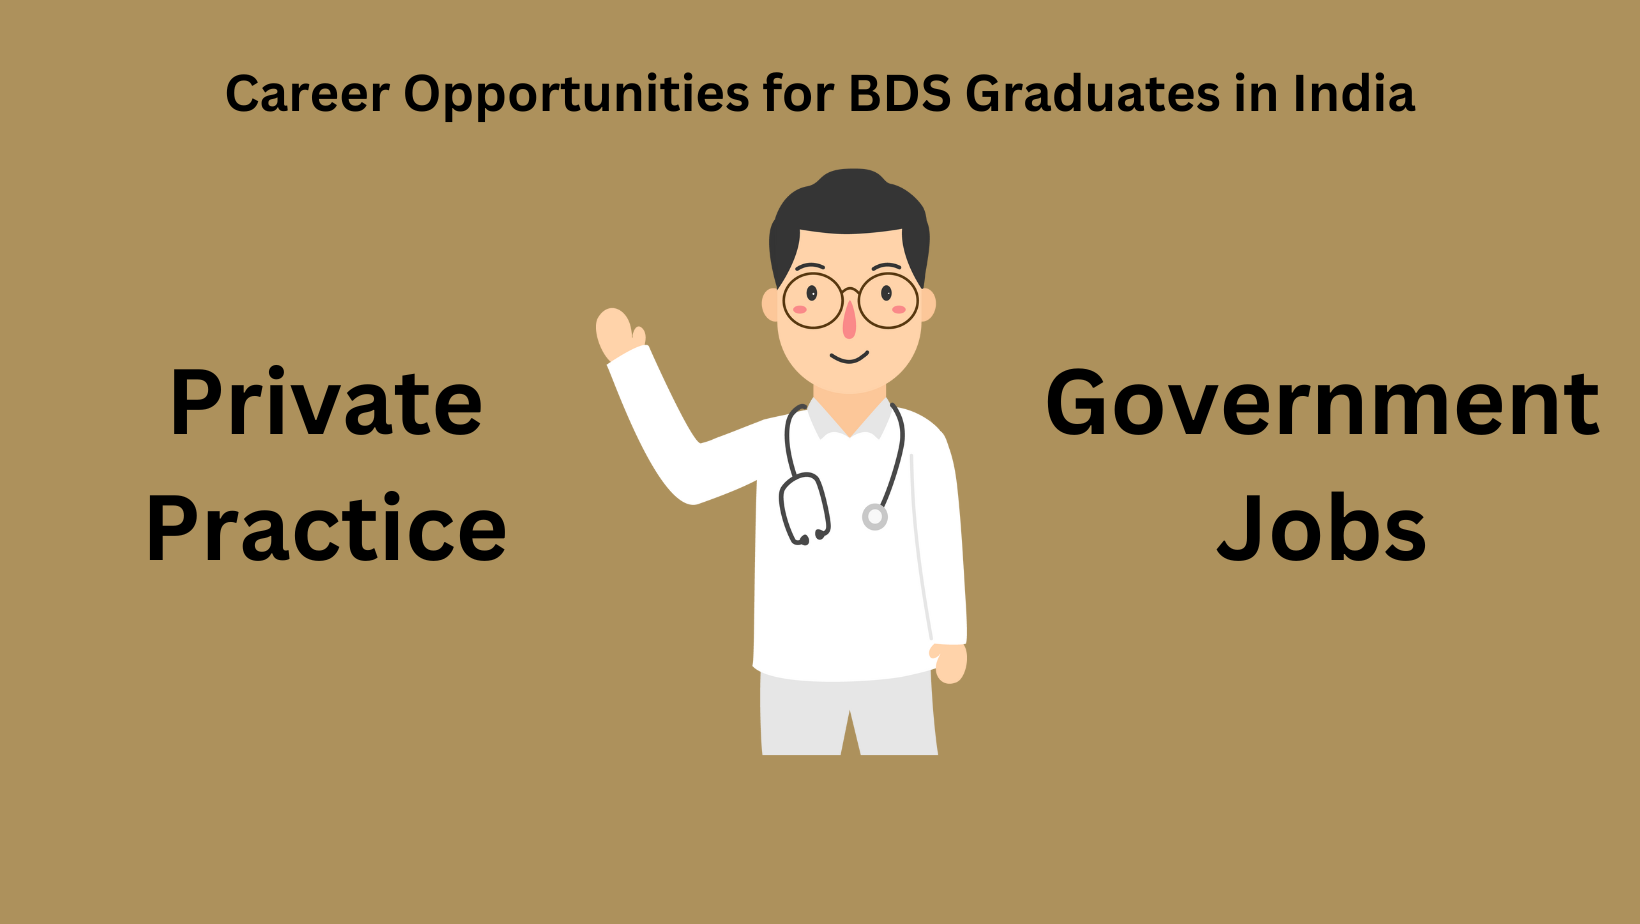 Career Opportunities for BDS Graduates in India: Private Practice vs. Government Jobs